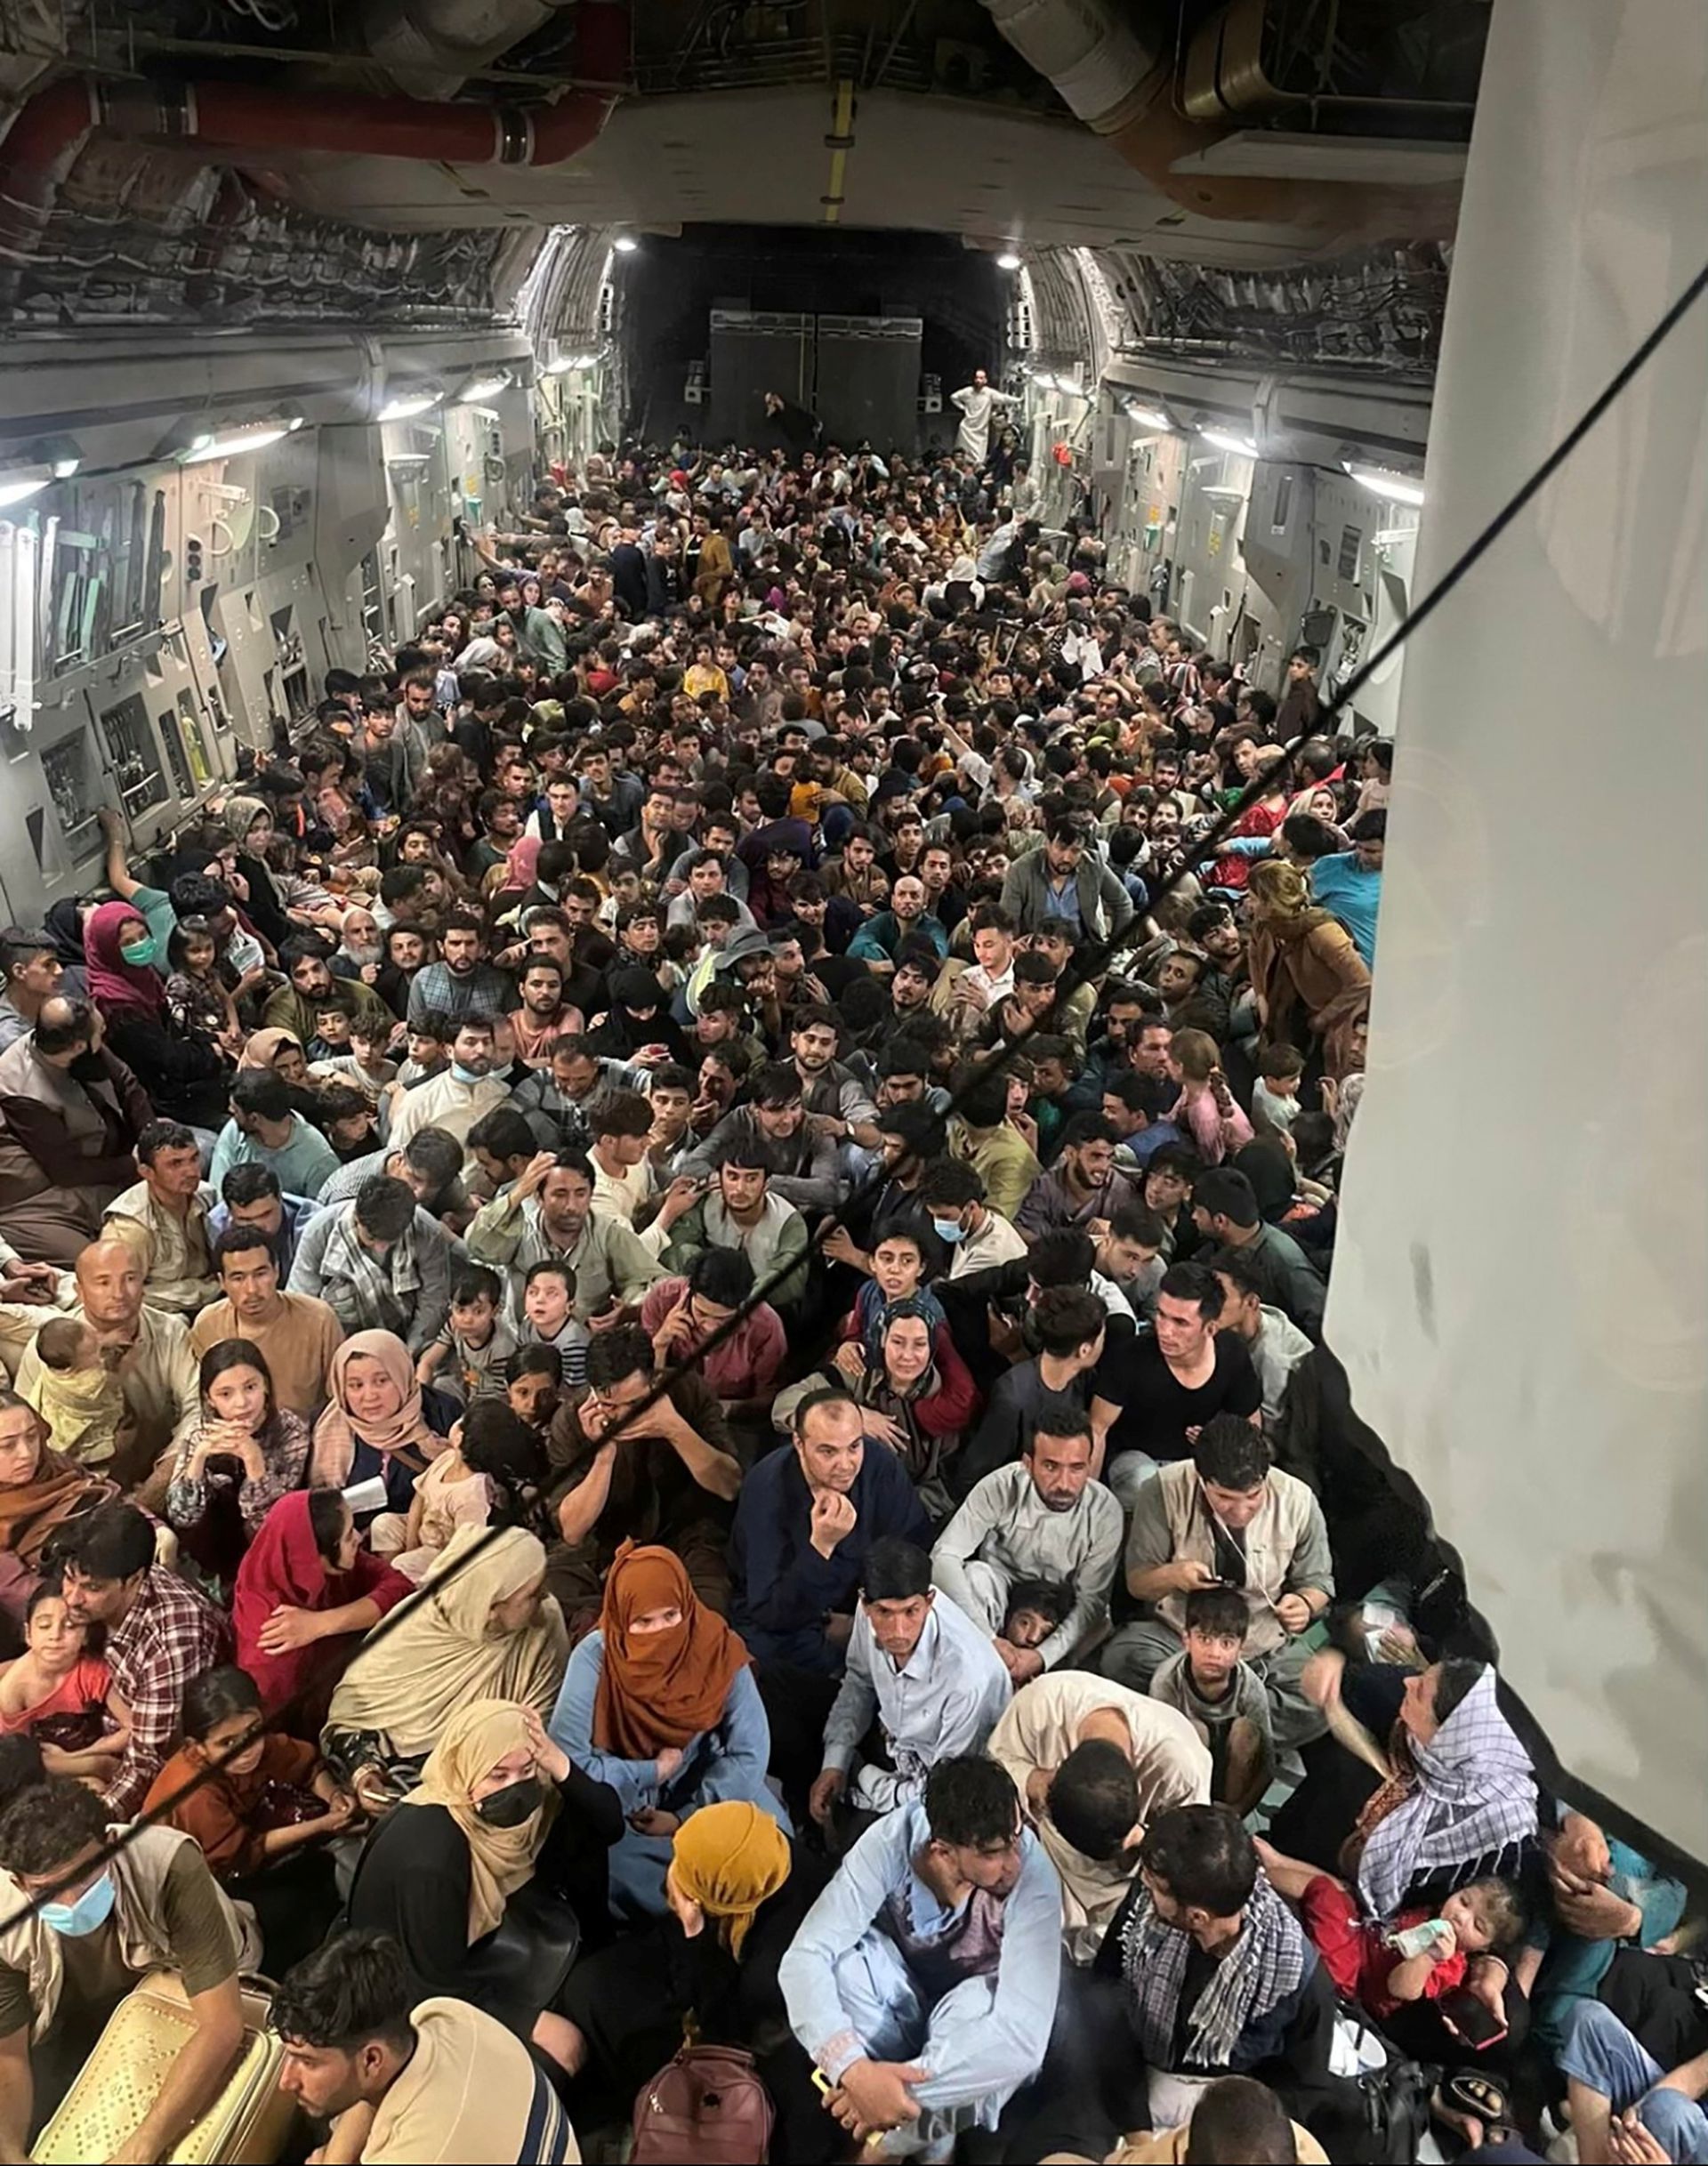 The great escape.. Shocking picture of hundreds of Afghans "crammed" inside military plane